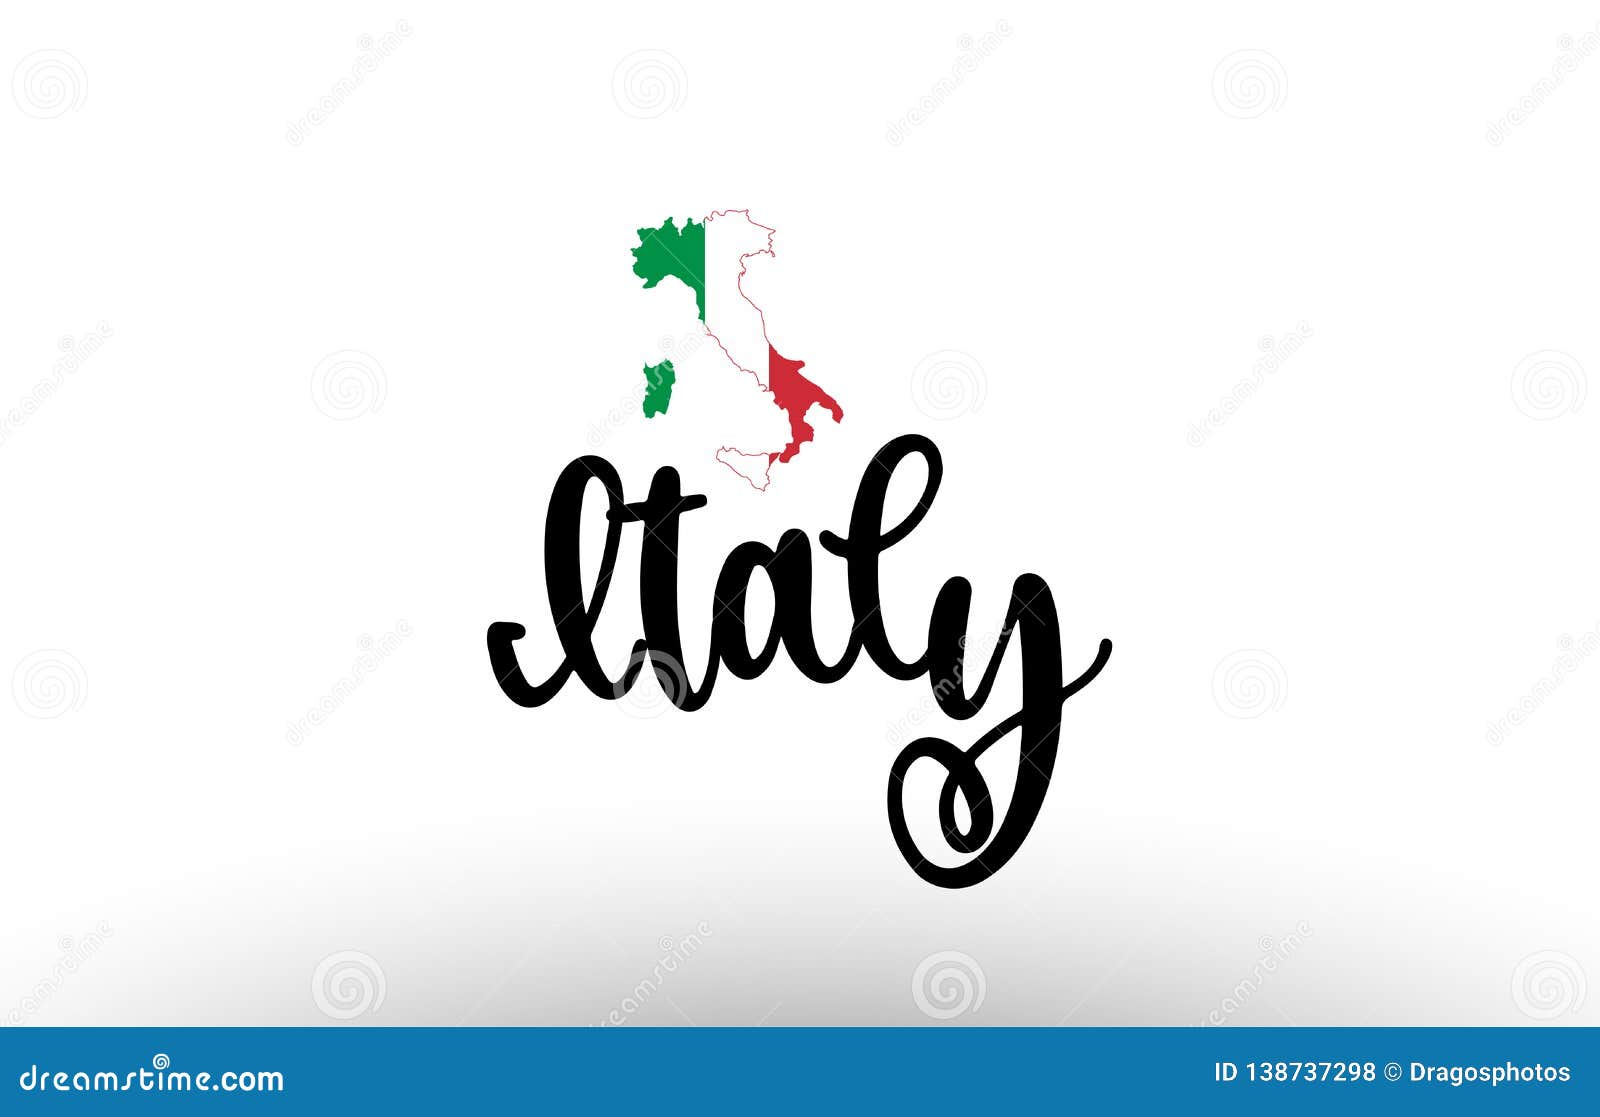 Italy Country Big Text with Flag Inside Map Concept Logo Stock Vector ...